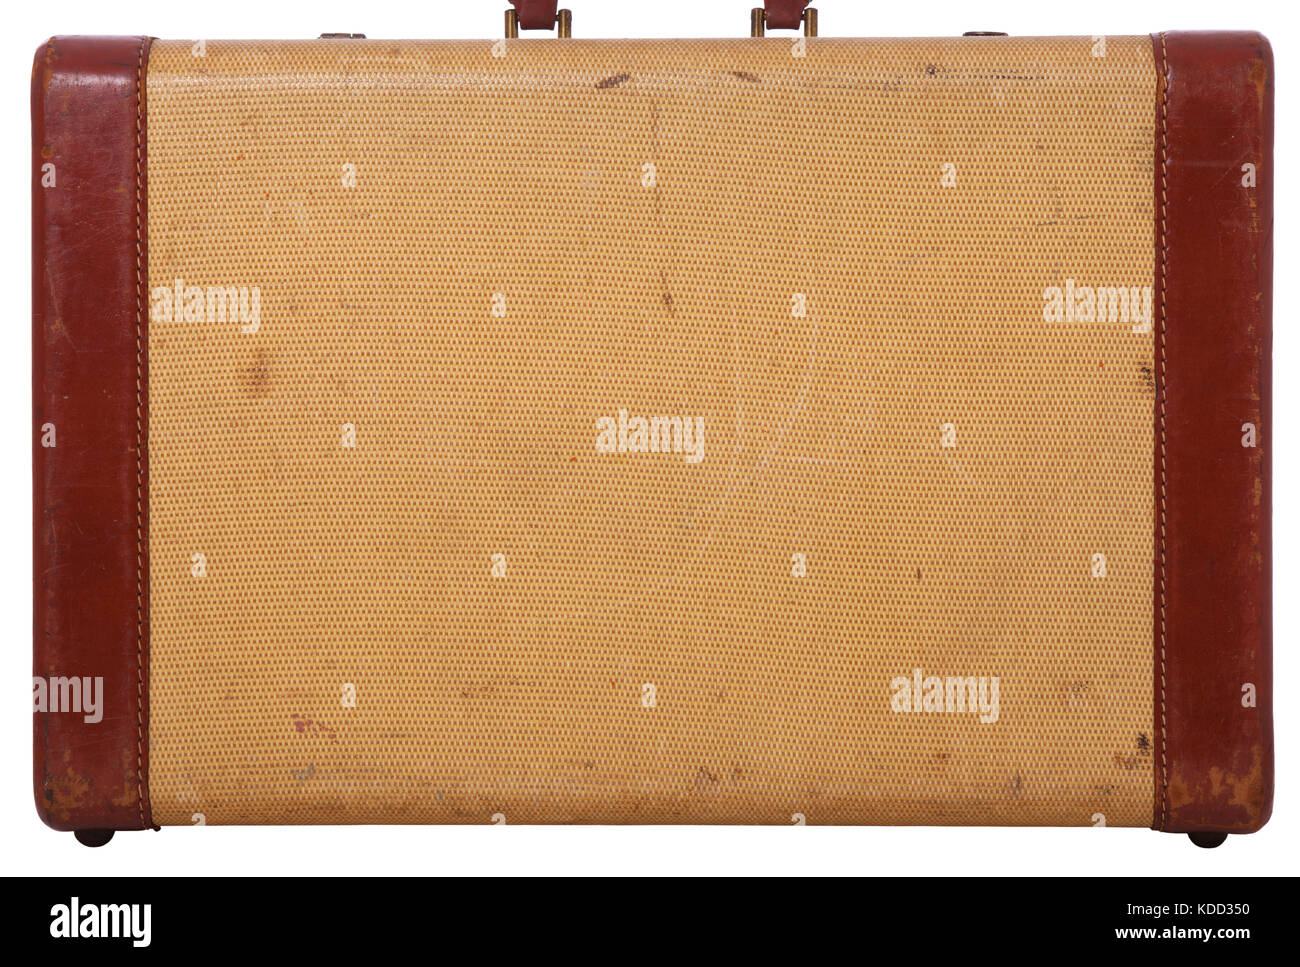 Side view of an old suitcase with leather and a woven texture Stock Photo